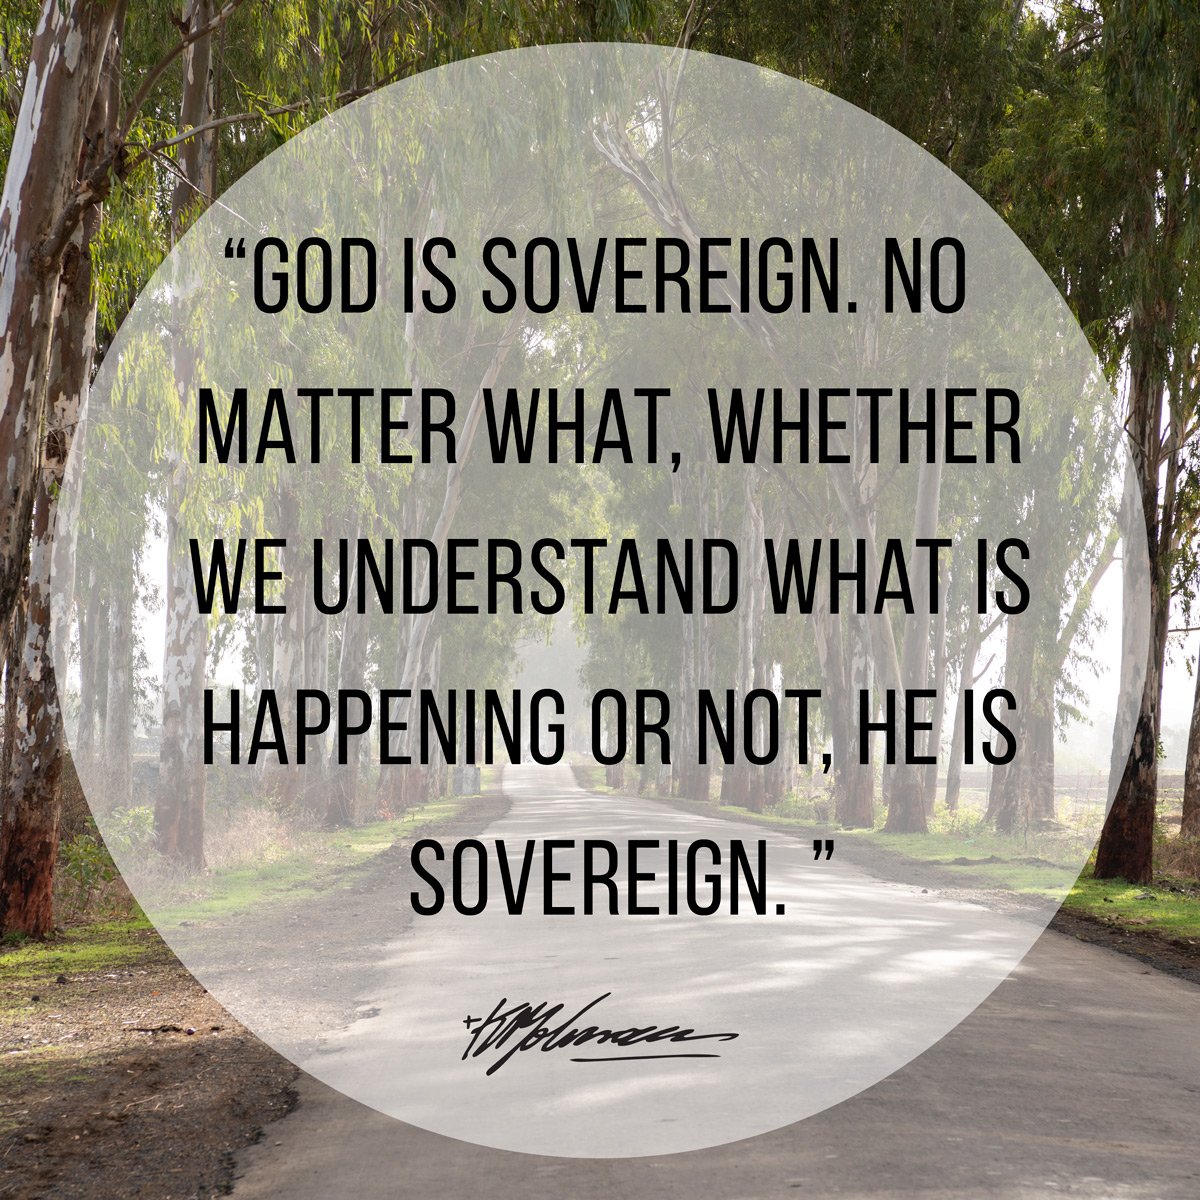 "God is sovereign. No matter what, whether we understand what is happening or not, He is sovereign." — Dr. KP Yohannan